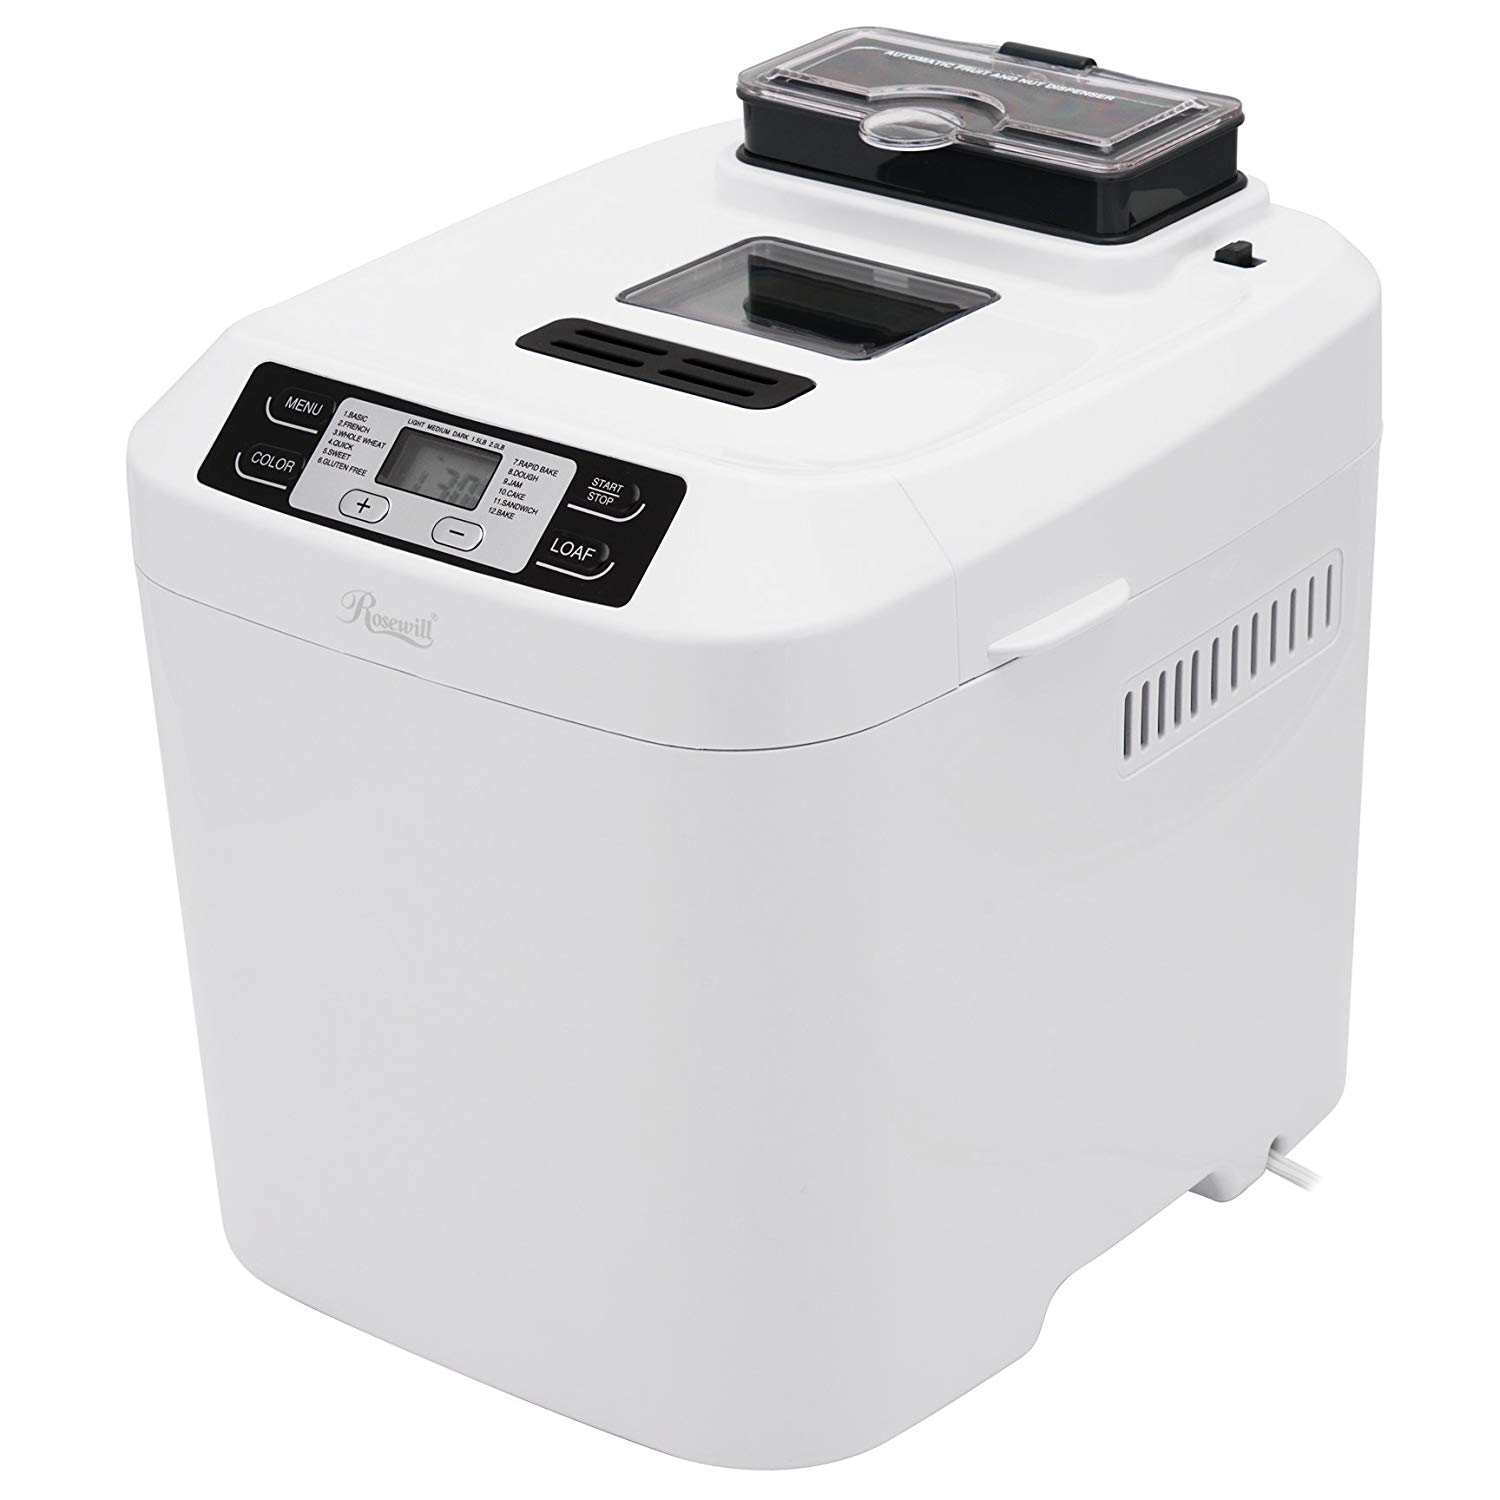 Rosewill RHBM-15001 2-Pound Programmable Rapid Bake Bre...